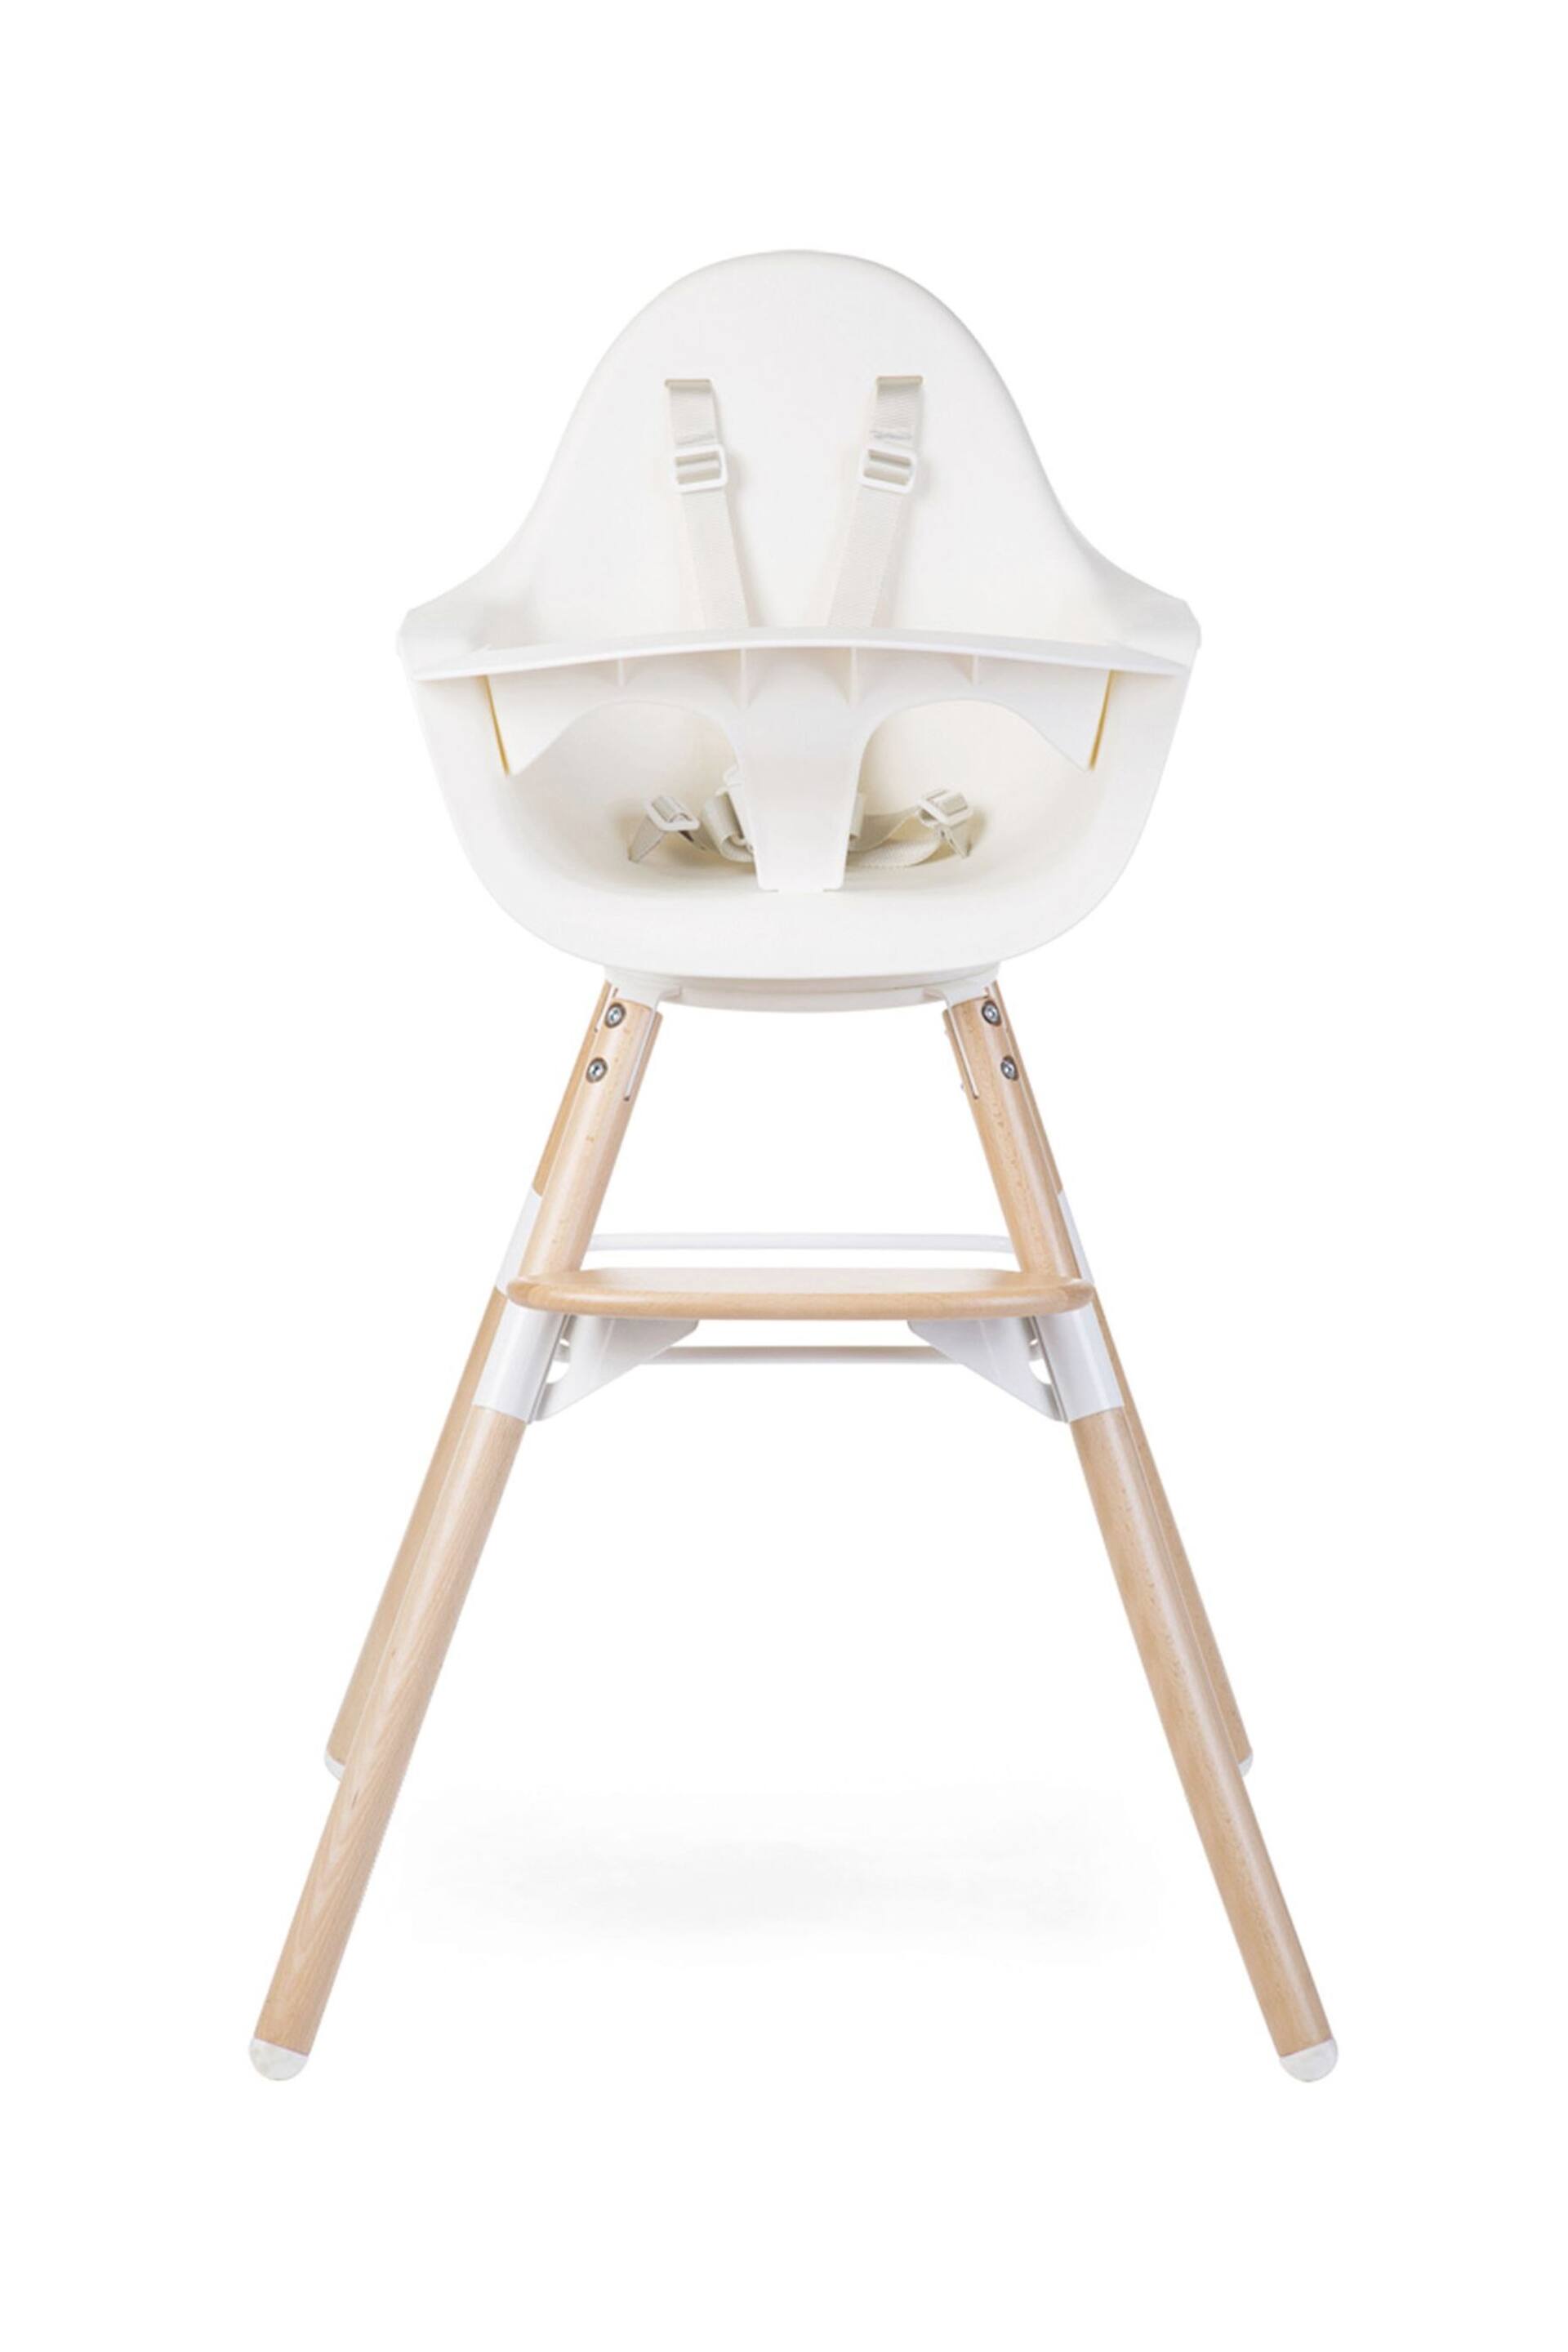 Childhome White Evolu One 80° High Chair White - Image 2 of 10